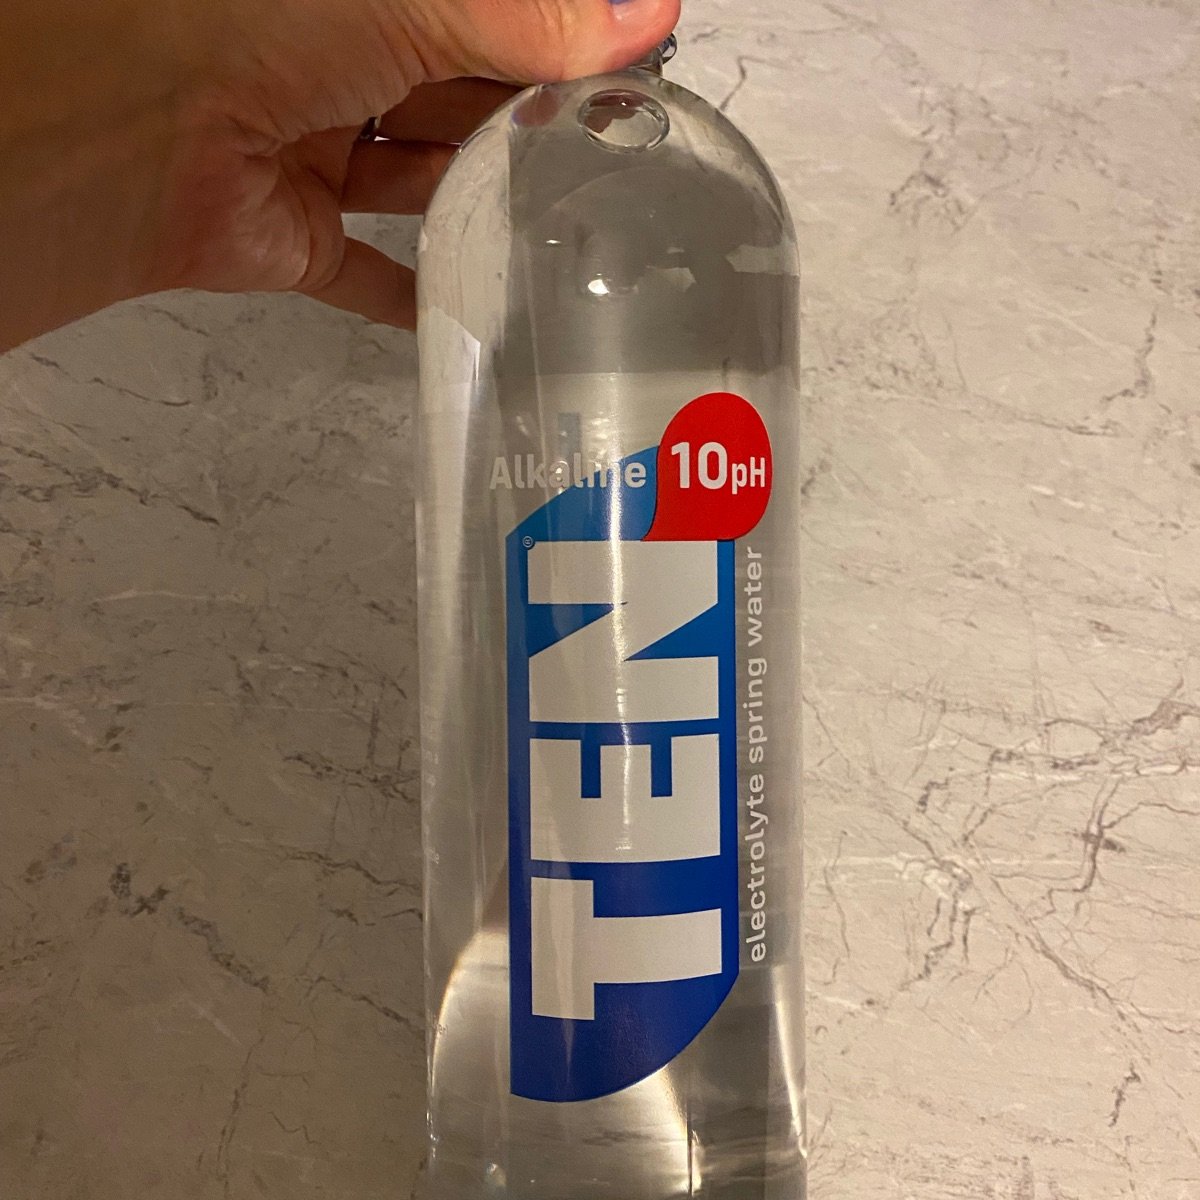 About TEN Spring Water